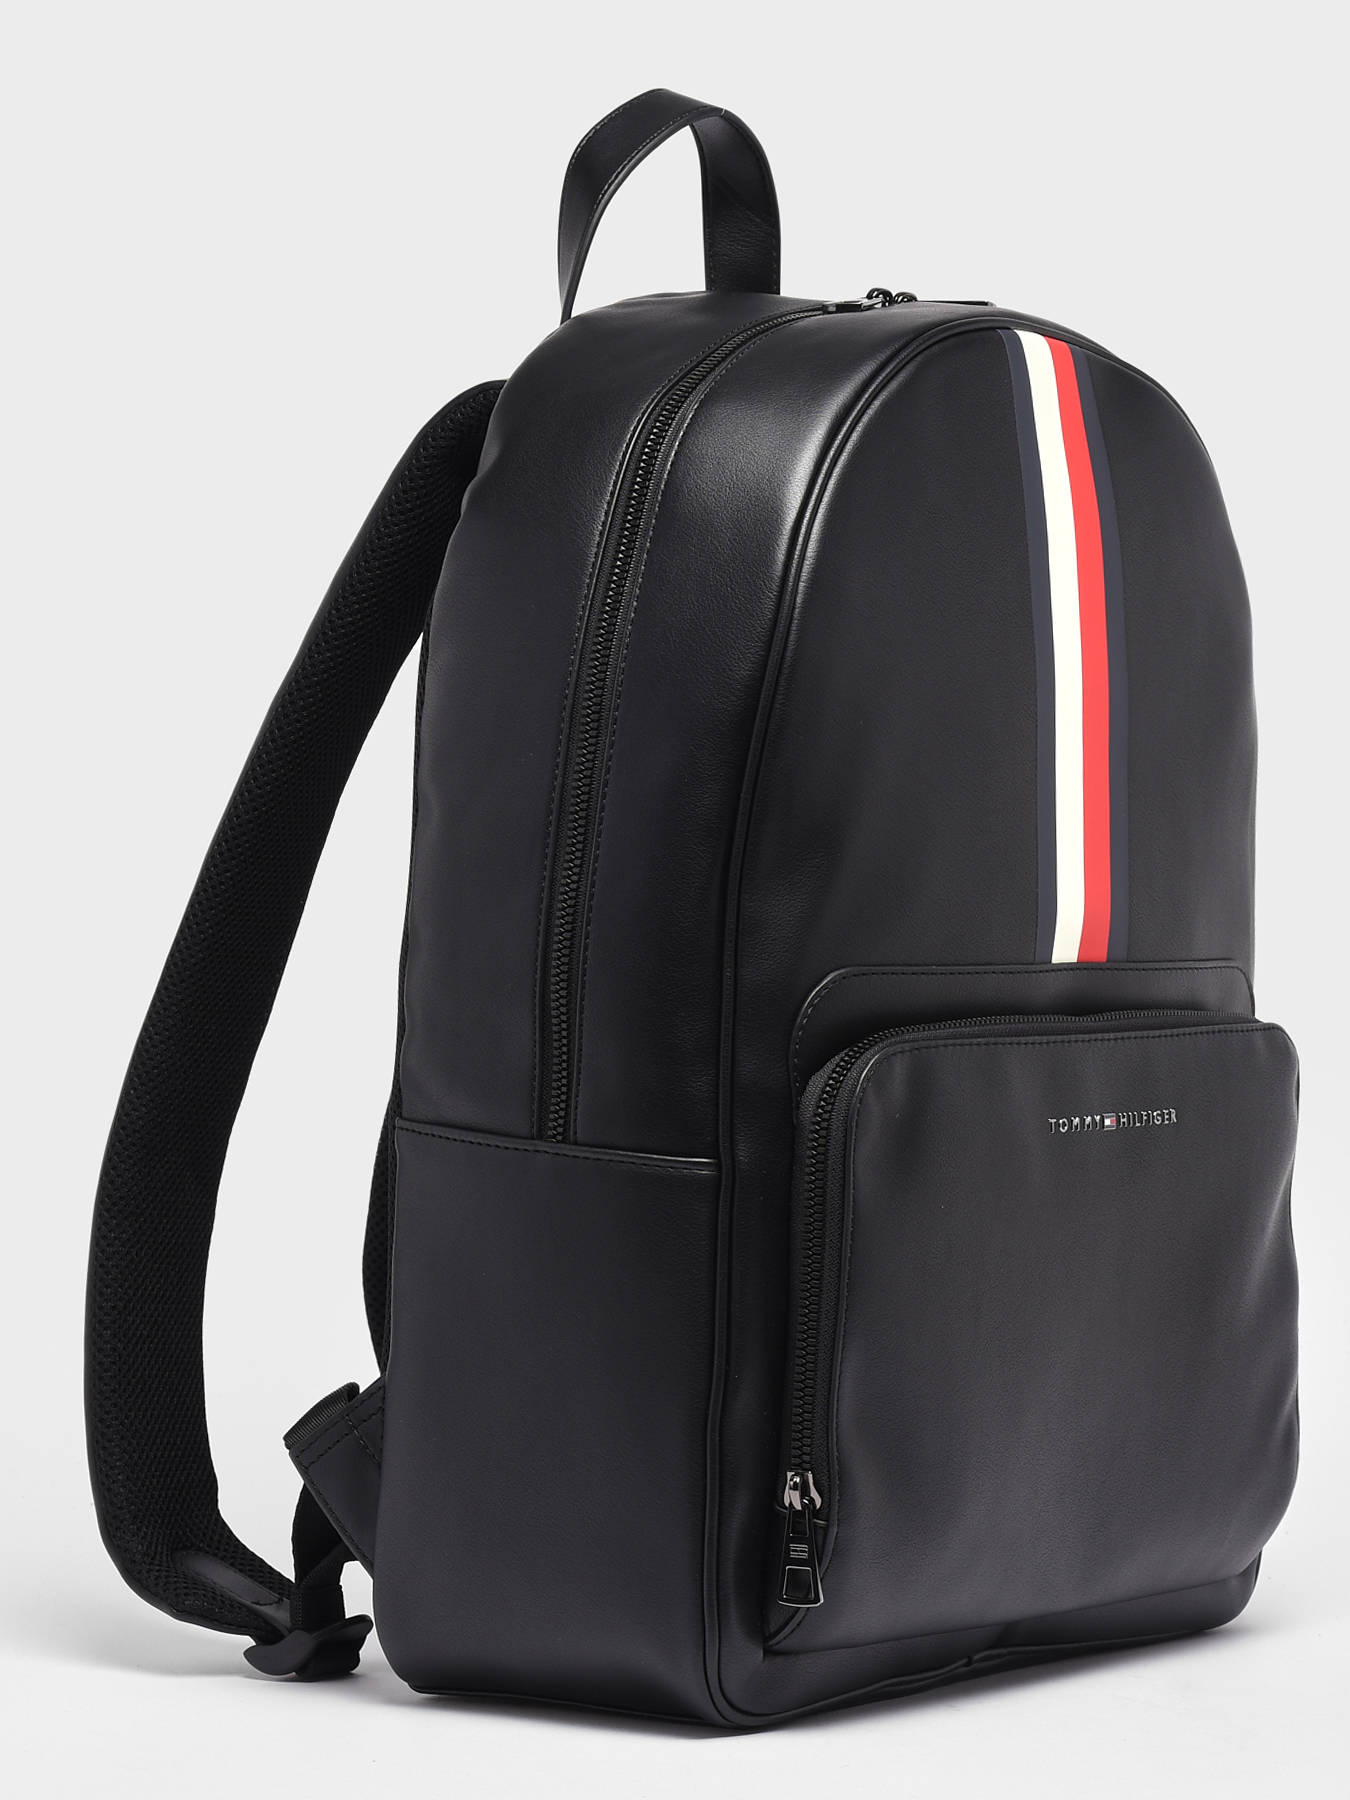 Tommy Hilfiger Bagpack AM0AM09544 - best prices